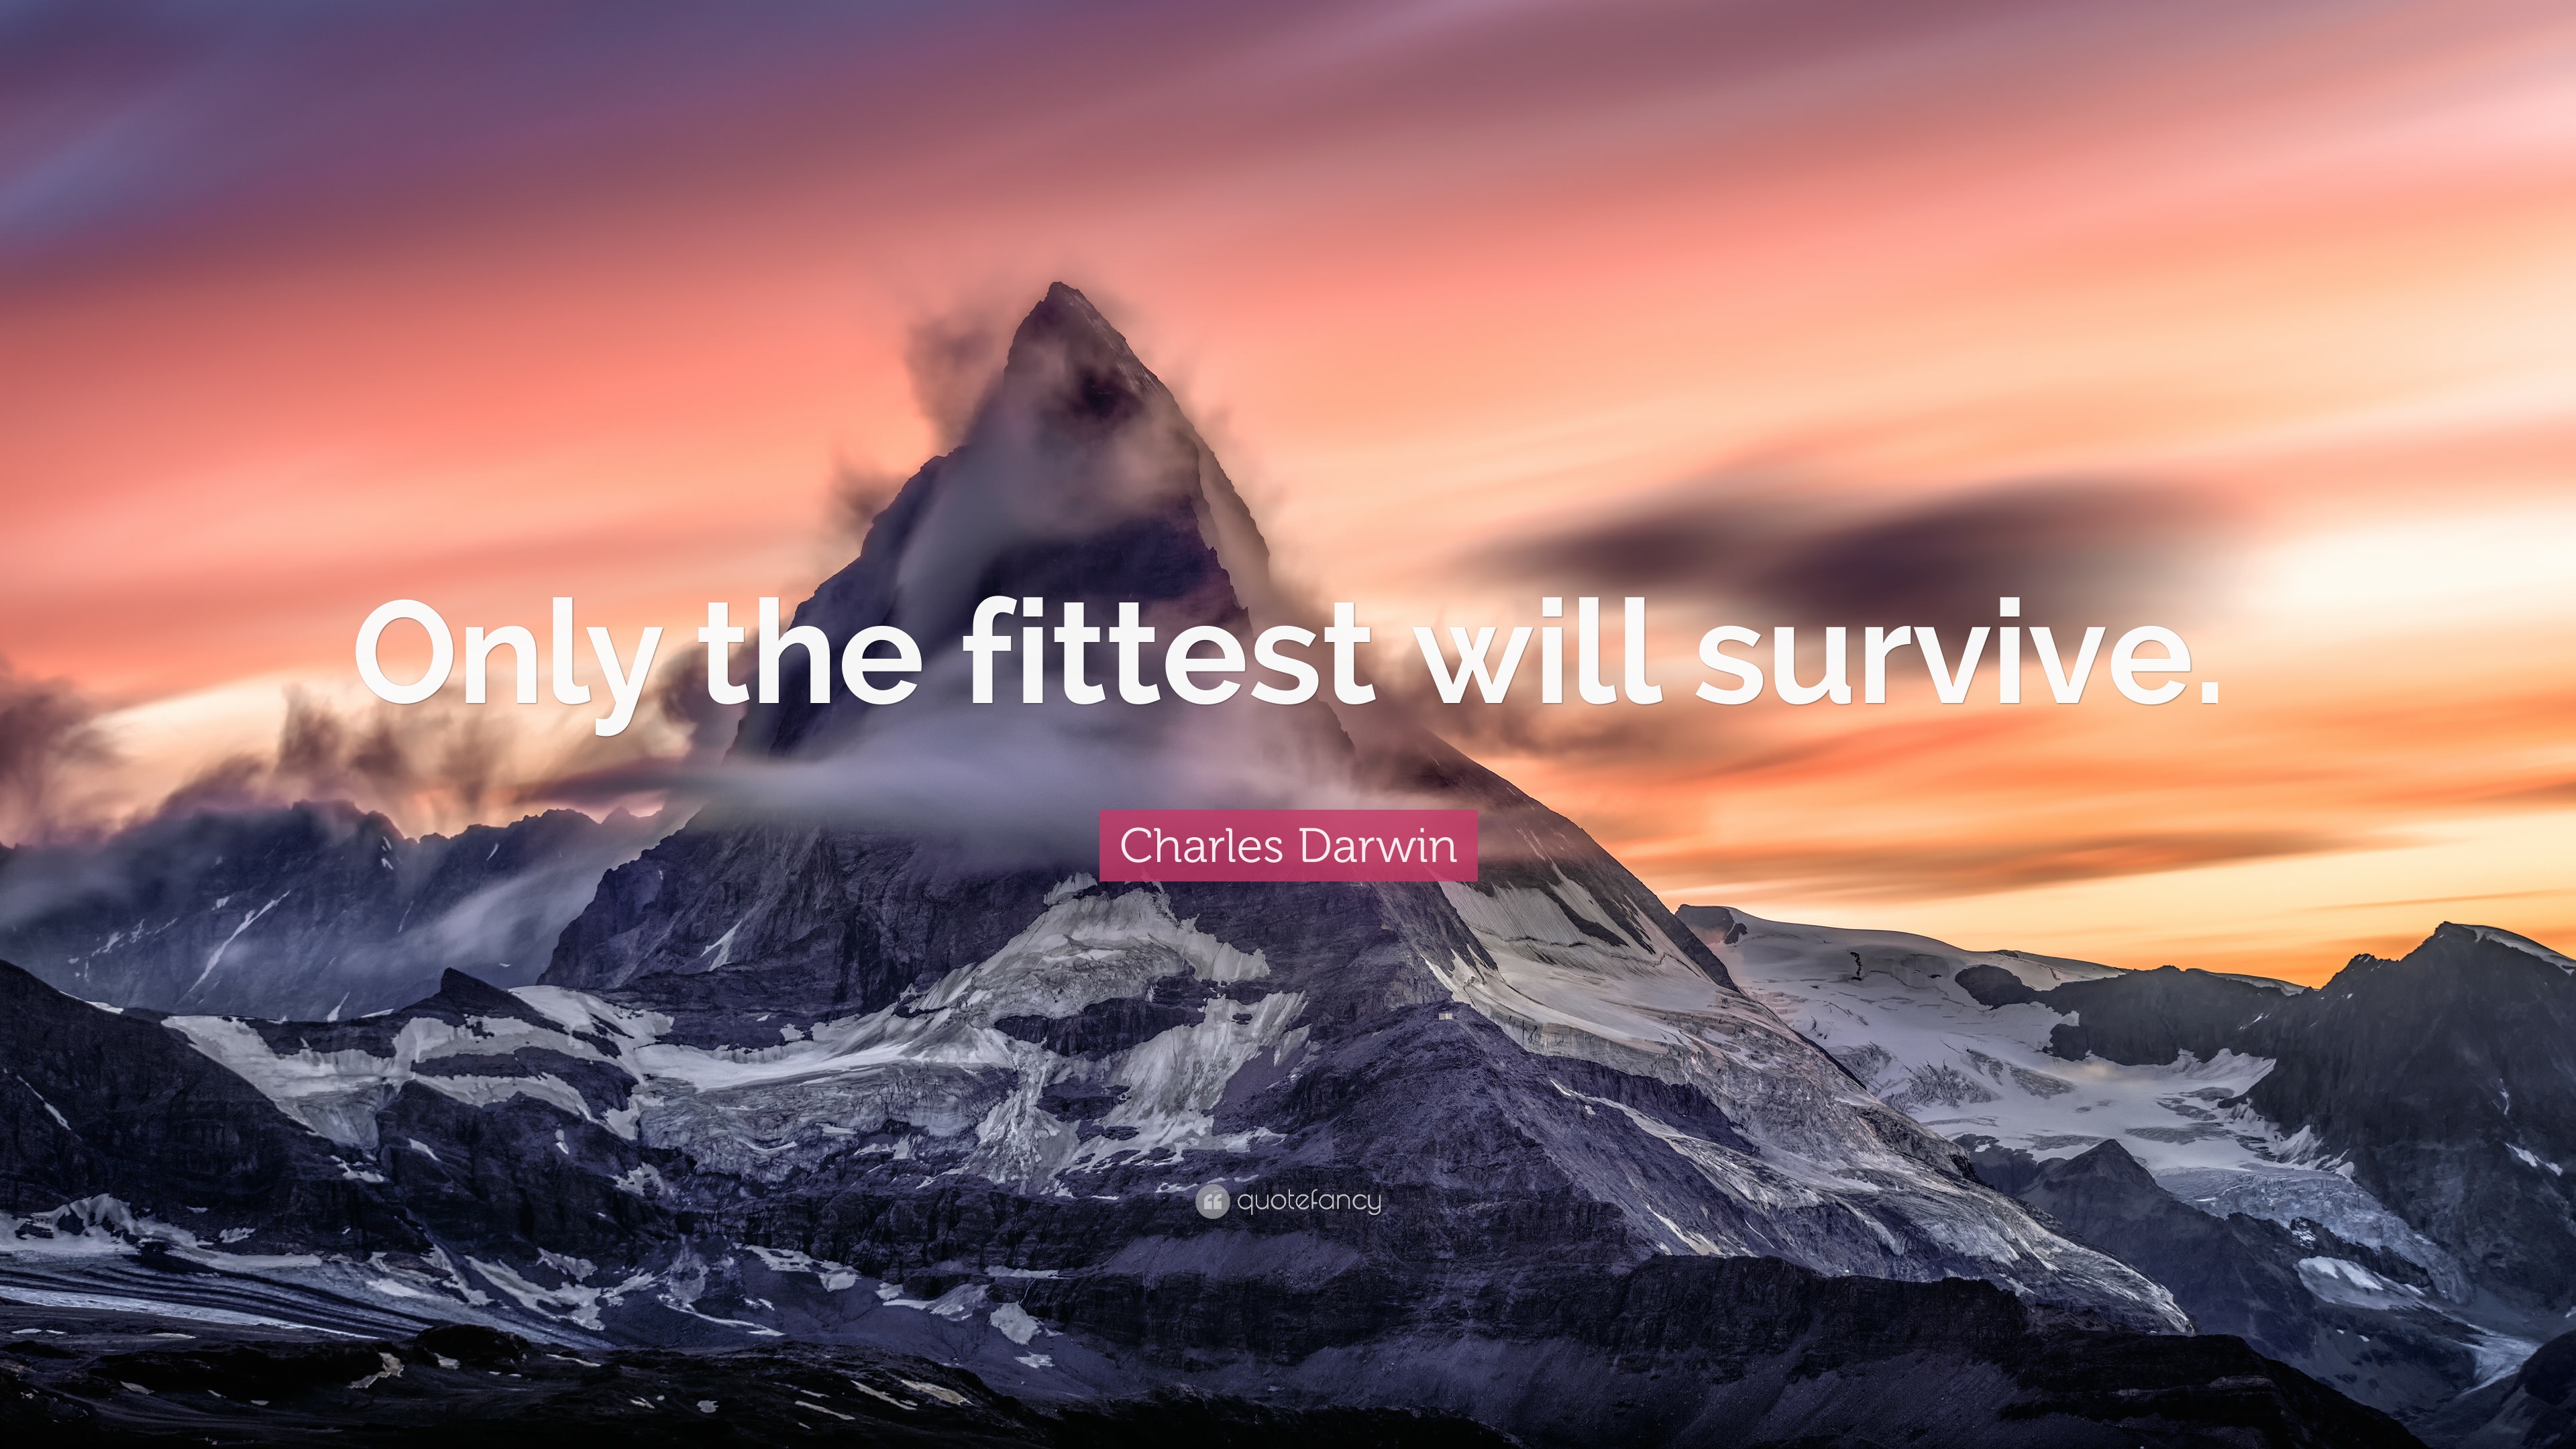 Charles Darwin quote This…I call Natural Selection, or the Survival of the  Fittest - Large image 800 x 600 px